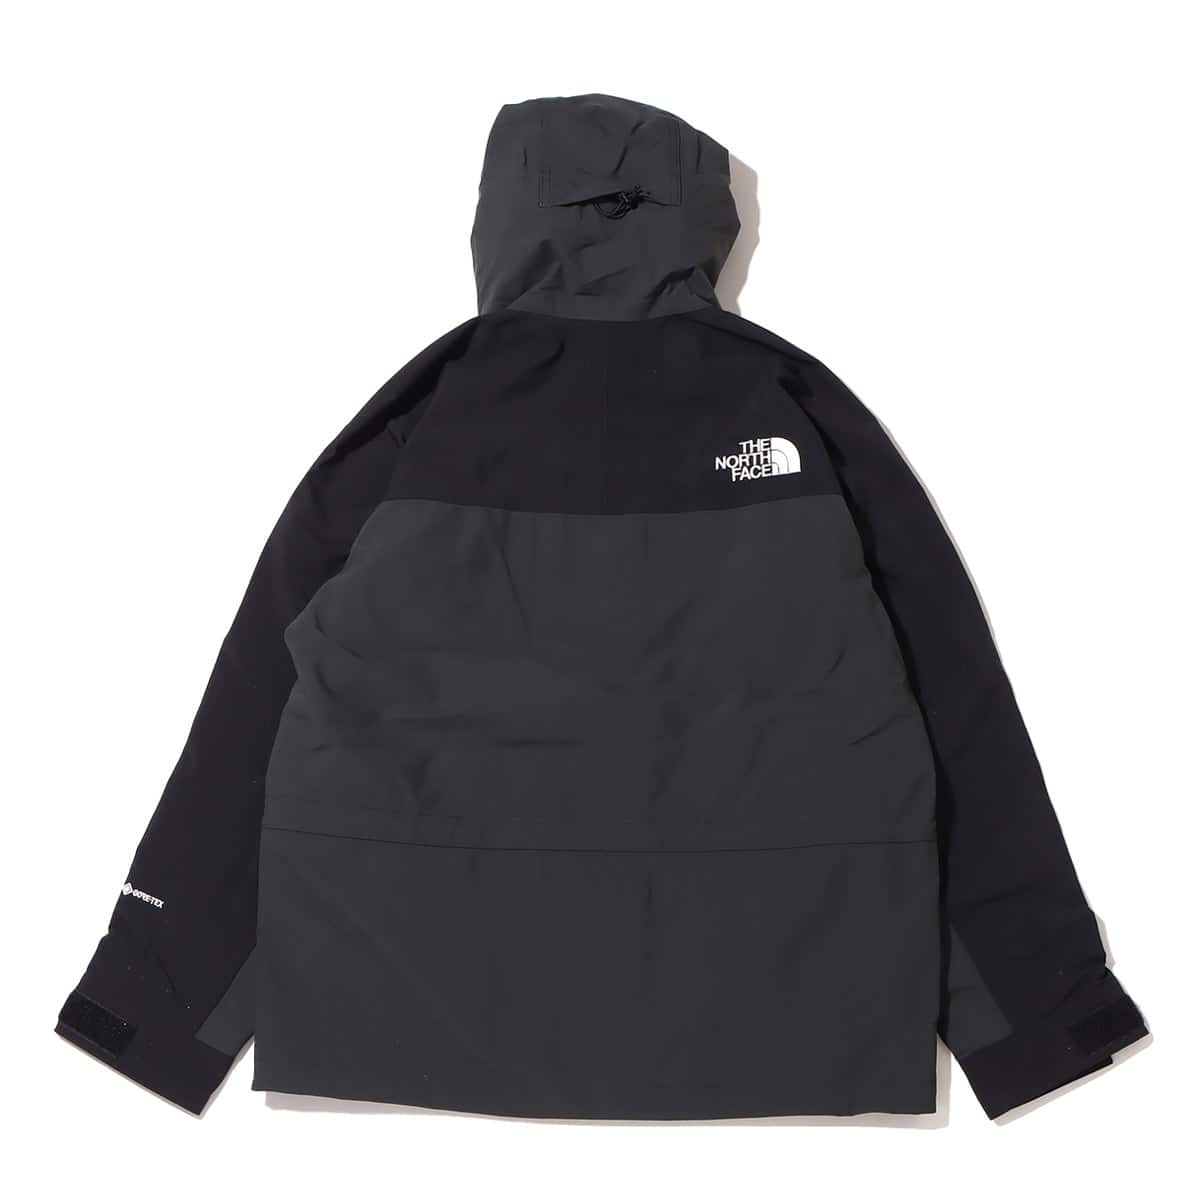 THE NORTH FACE MOUNTAIN LIGHT JACKET アスファルト グレー 23SS-I